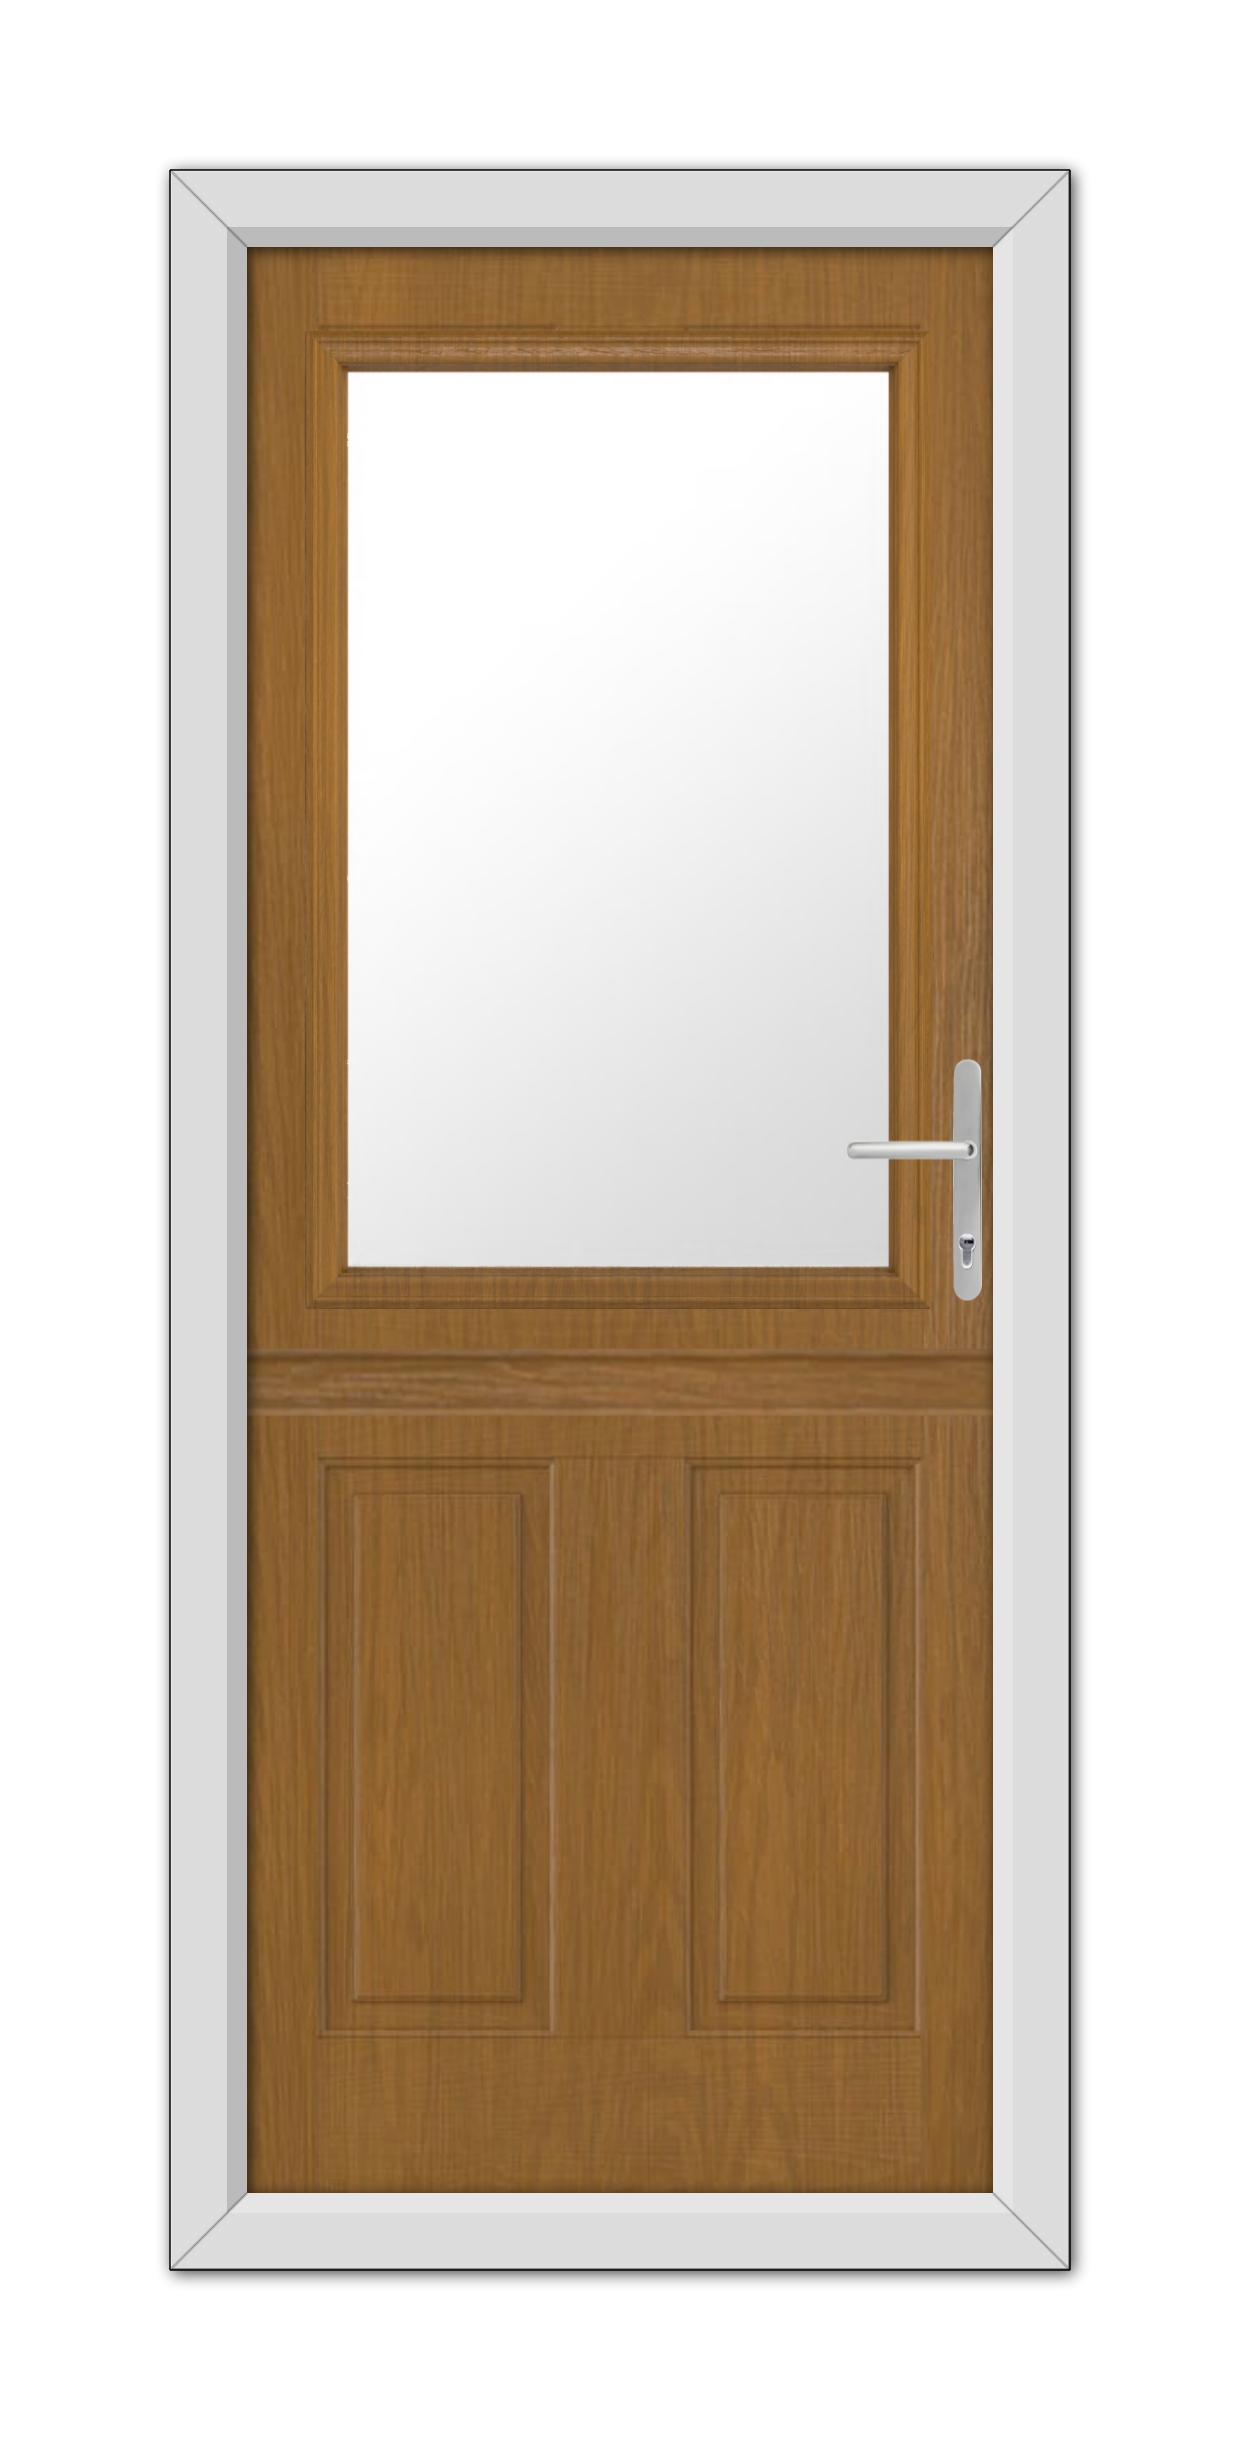 A Oak Buxton Stable Composite Door with a centered, rectangular frosted glass window, featuring a white frame and a metal handle on the right side.